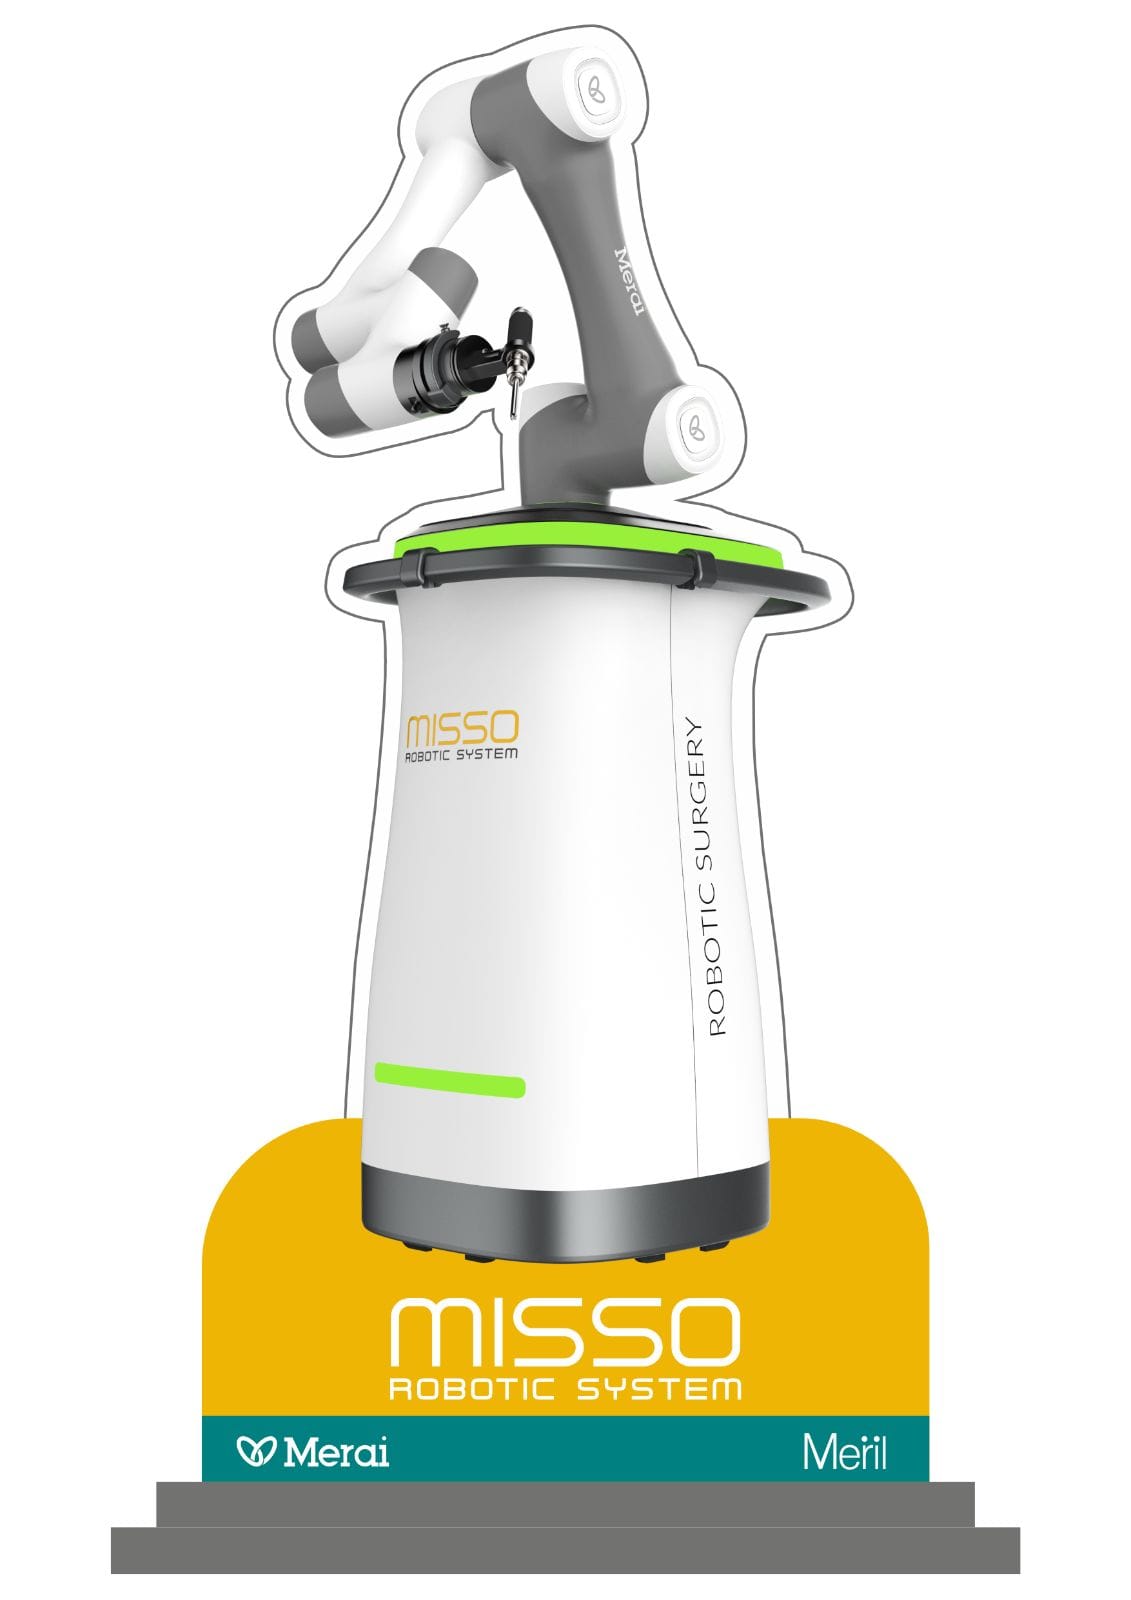 Introducing MISSO - knee replacement robot by Meril